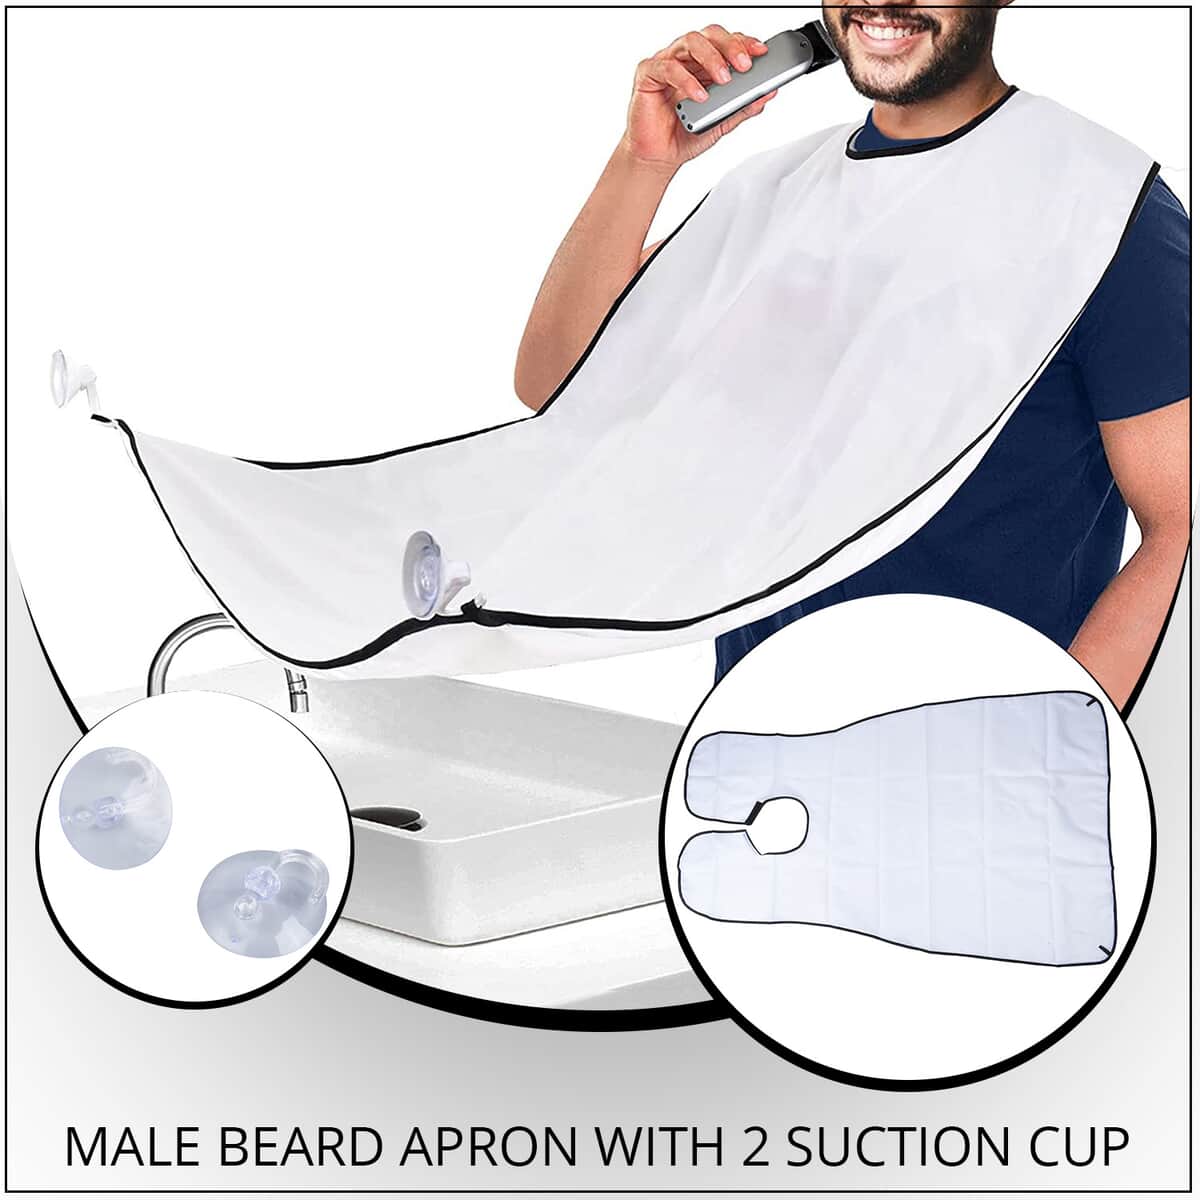 Male Beard Apron with 2 Suction Cup - White image number 1